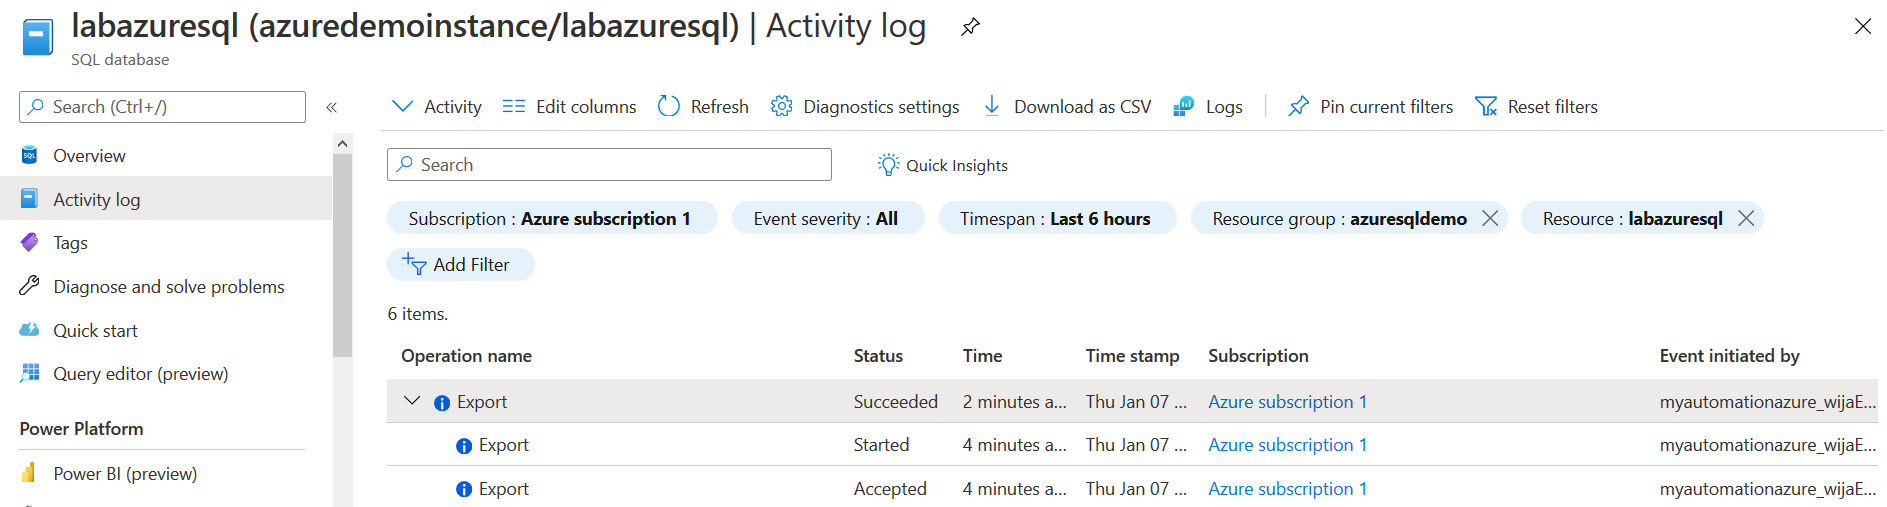 activity log for viewing BACPAC export 